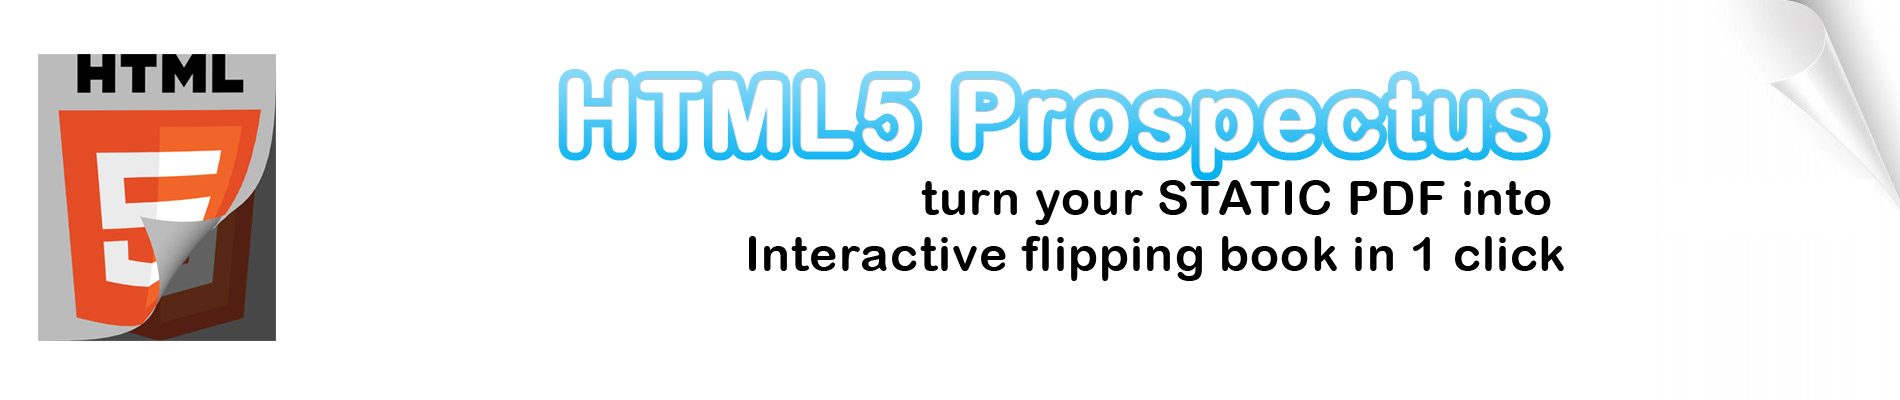 Flipping interactive HTML5 book